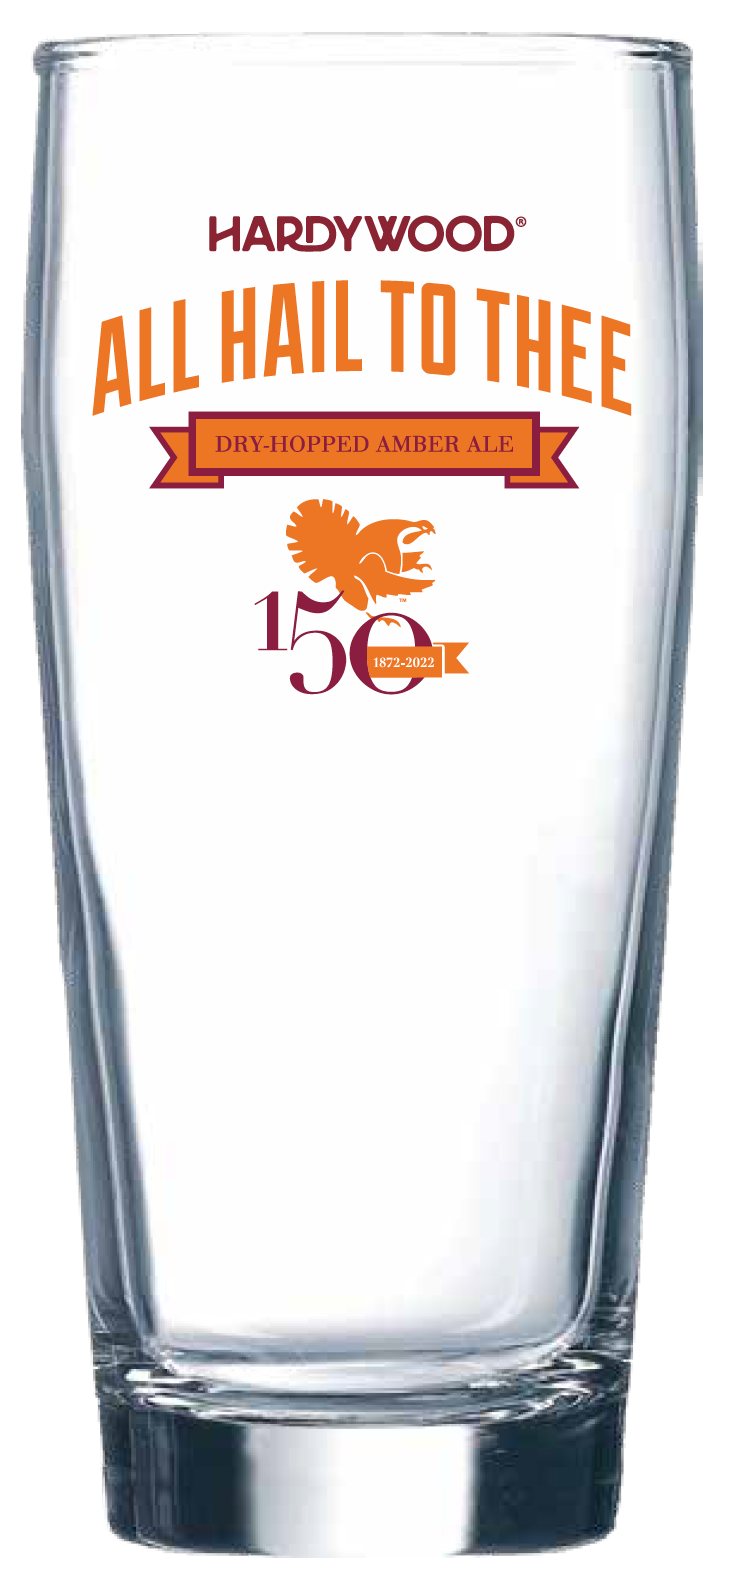 All Hail to Thee commemorative beer glass